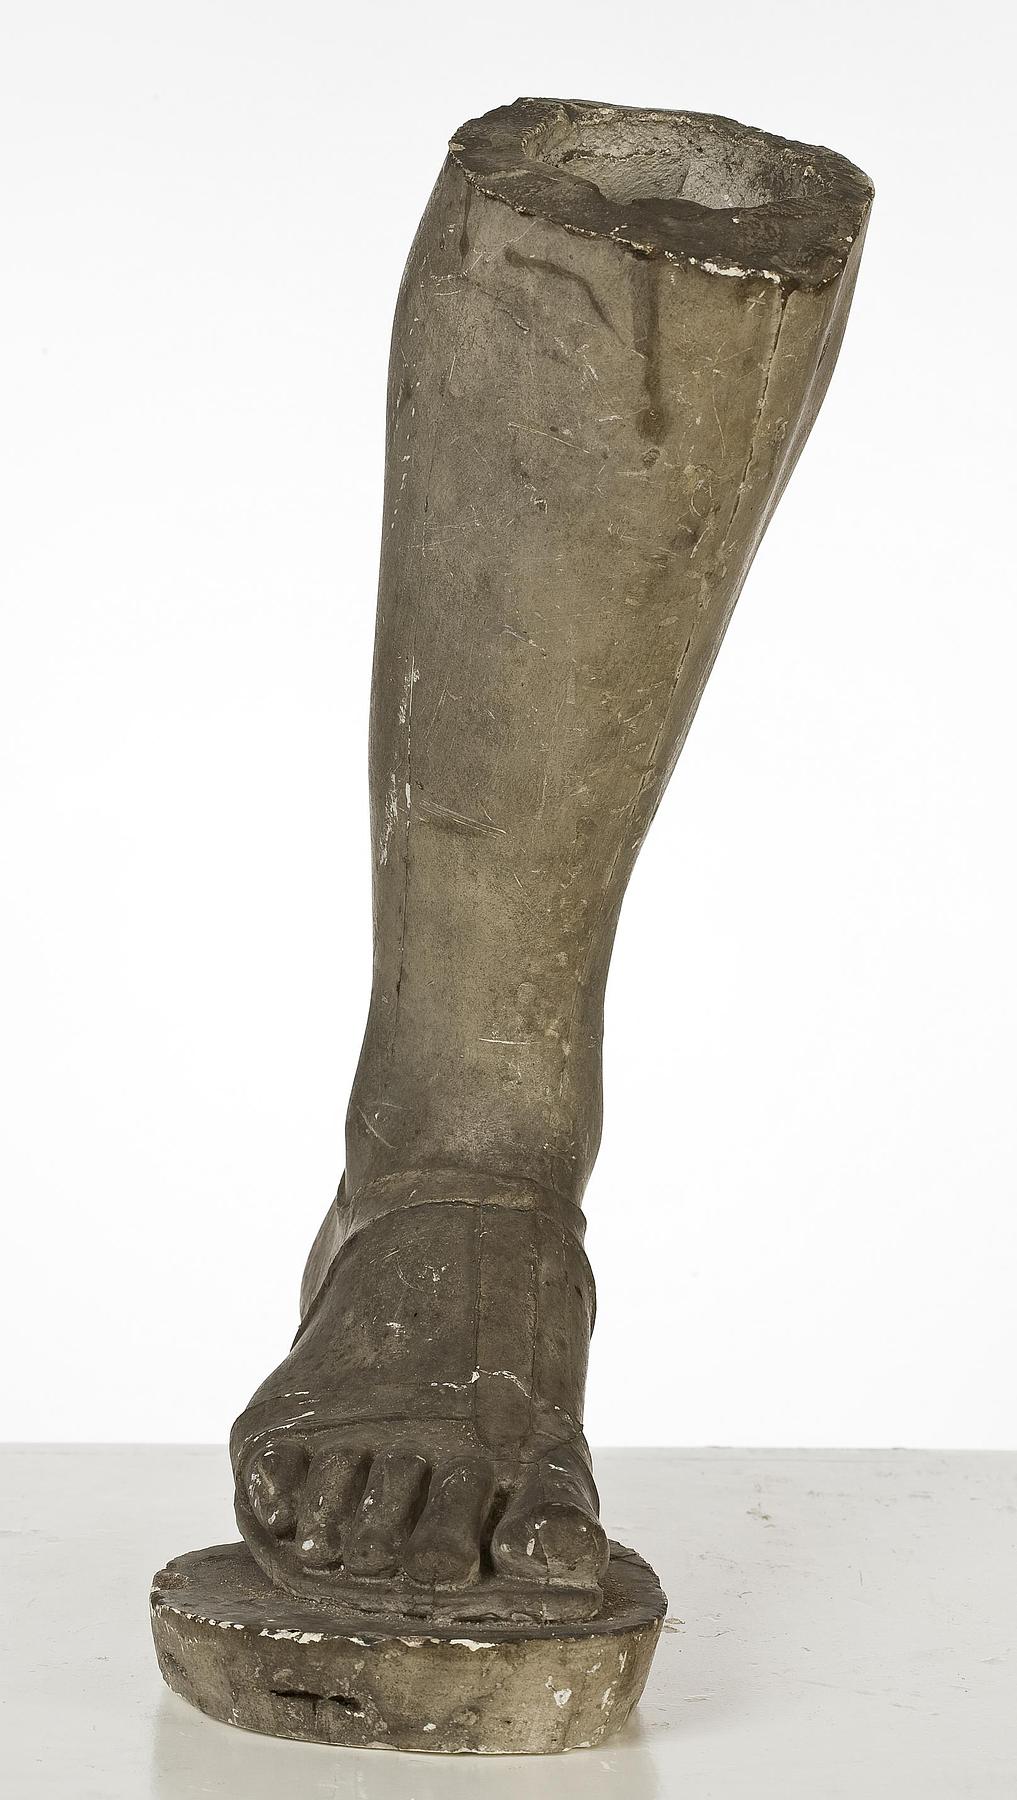 Right foot and ancle of the Capitoline Camillus, L71a